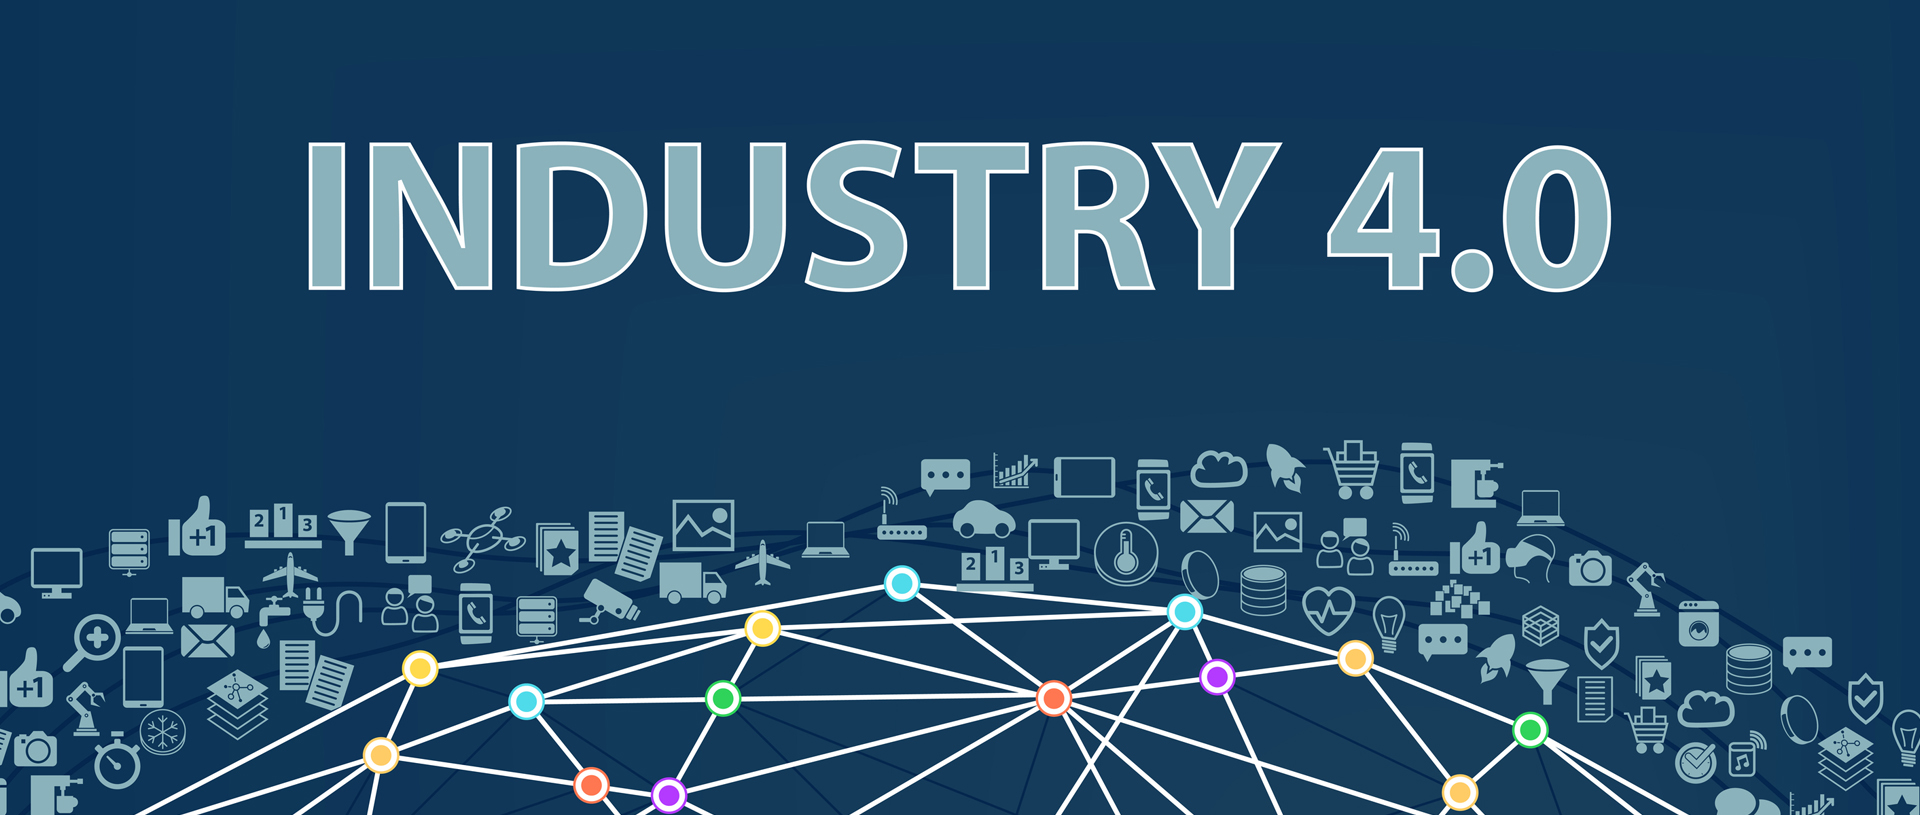 Only 25 countries well-positioned to benefit from Industry 4.0 ...